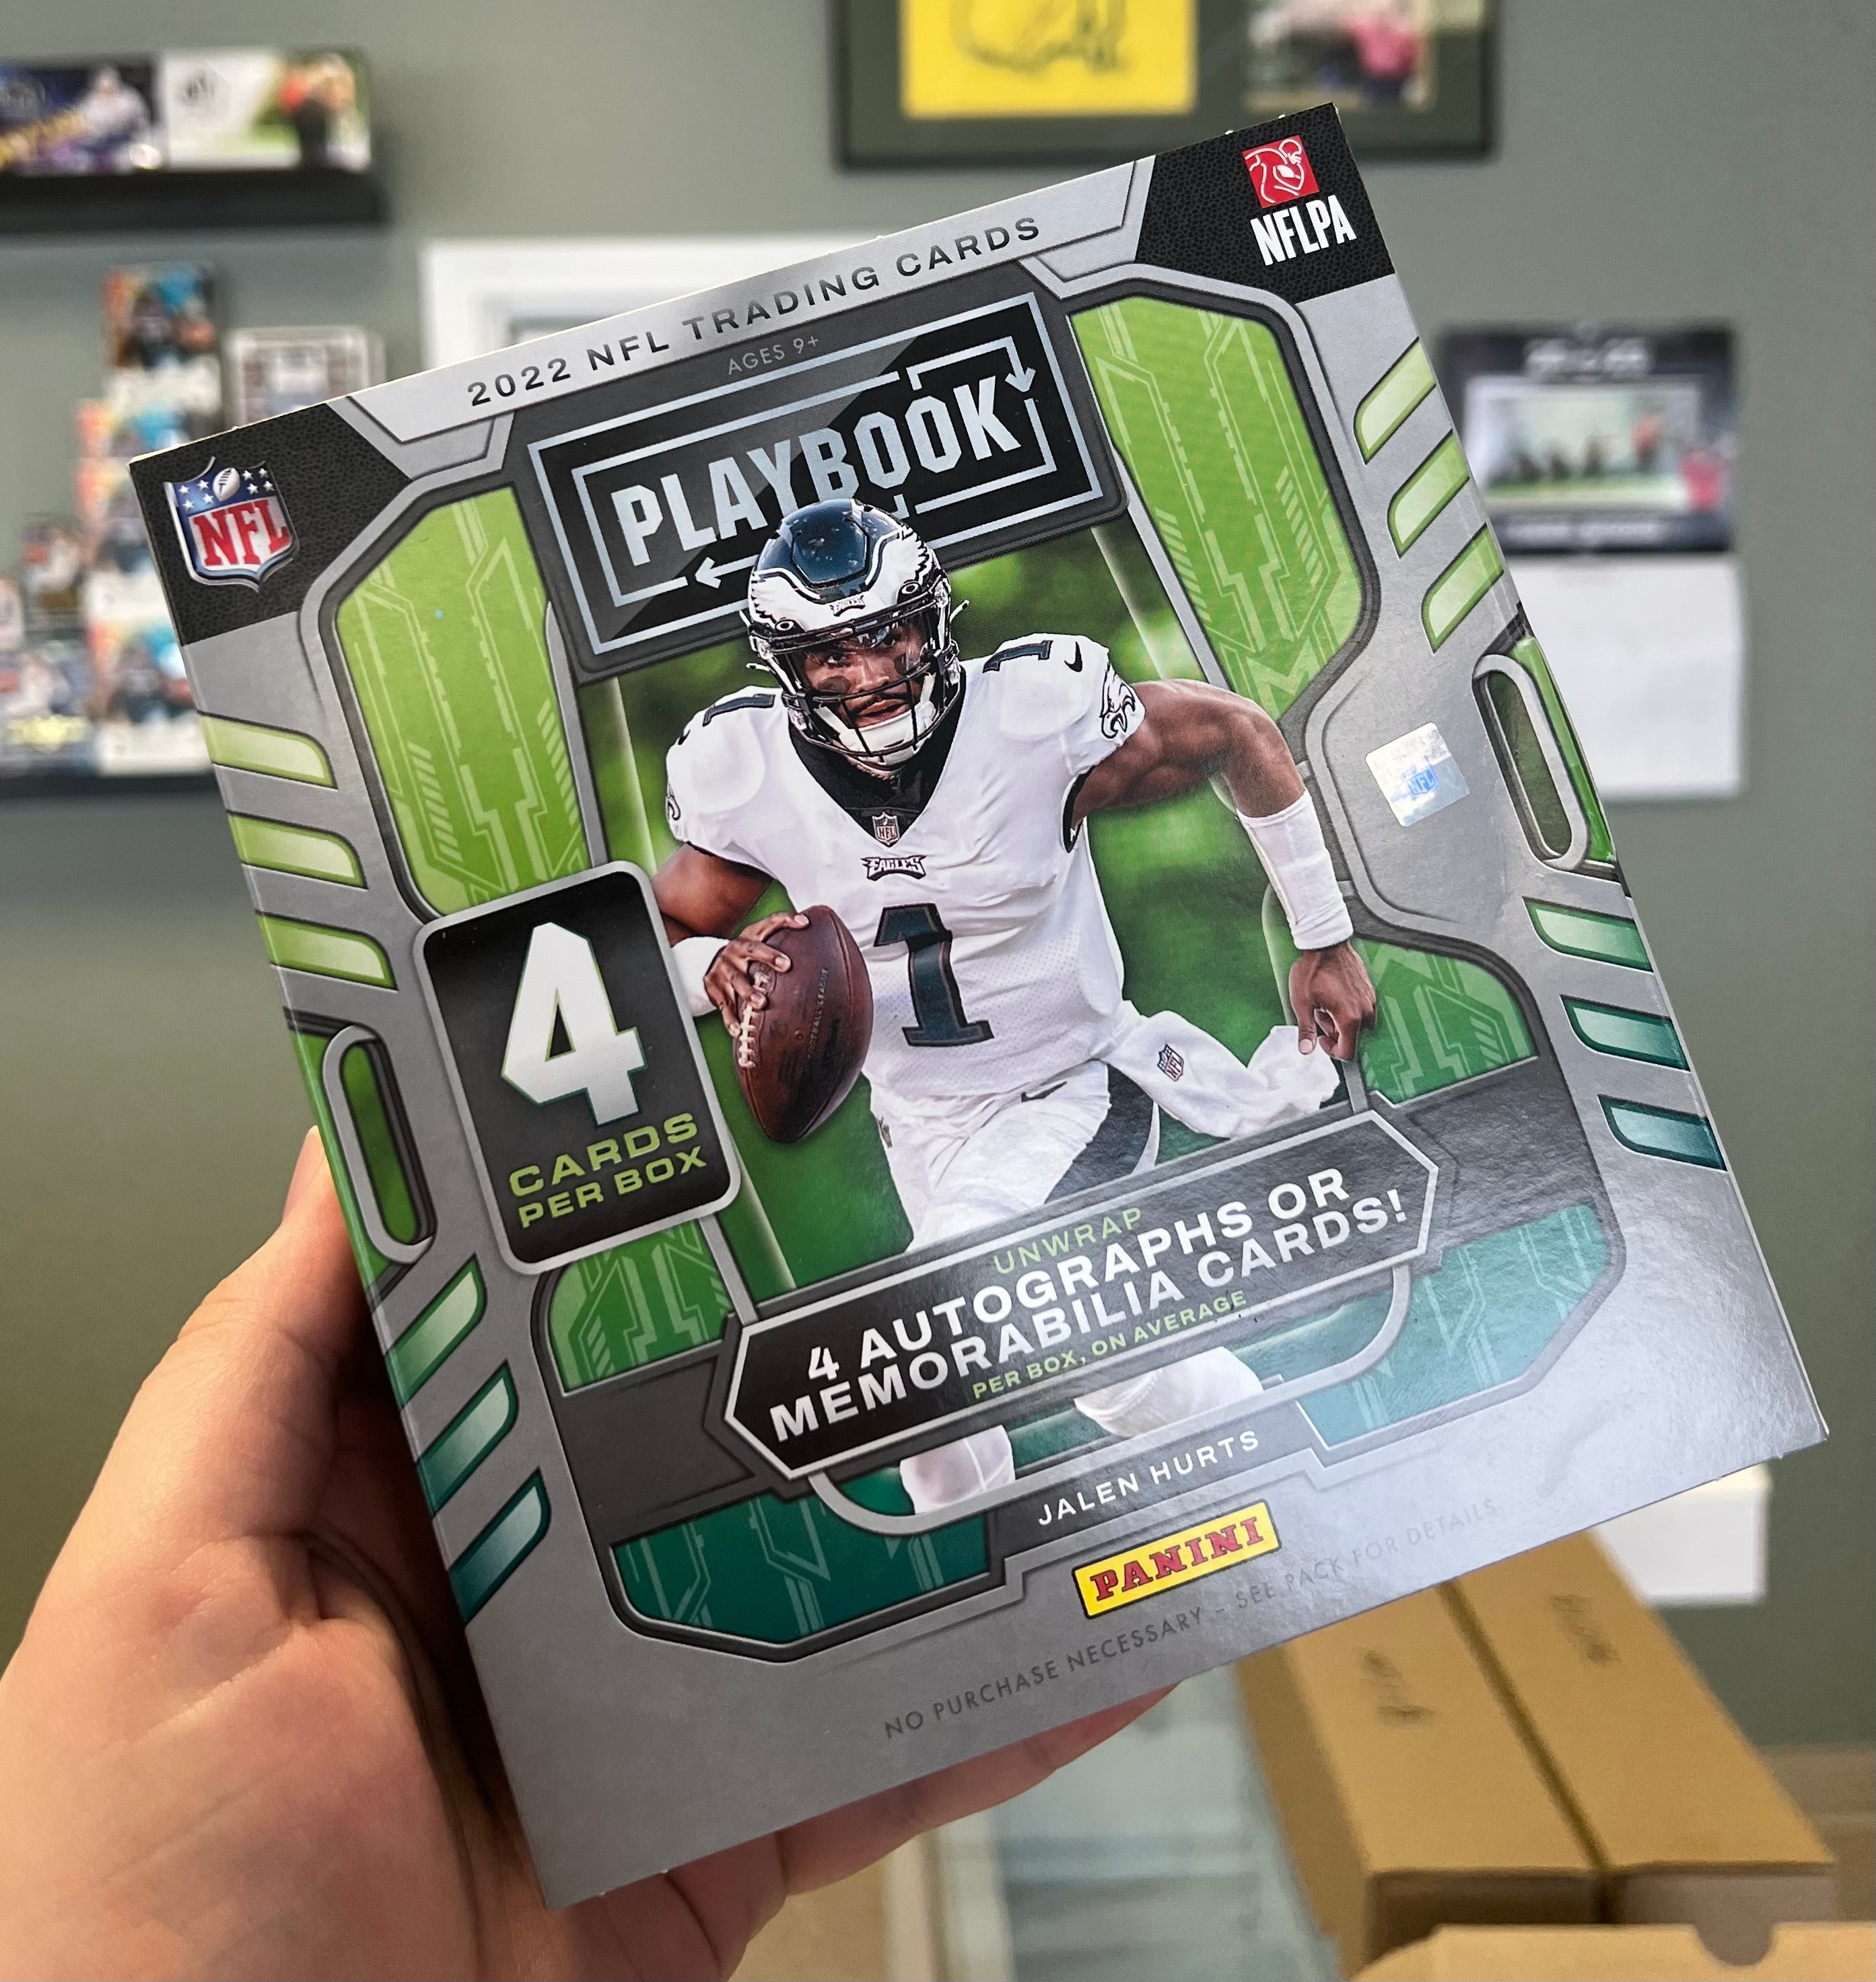 The Jersey Card